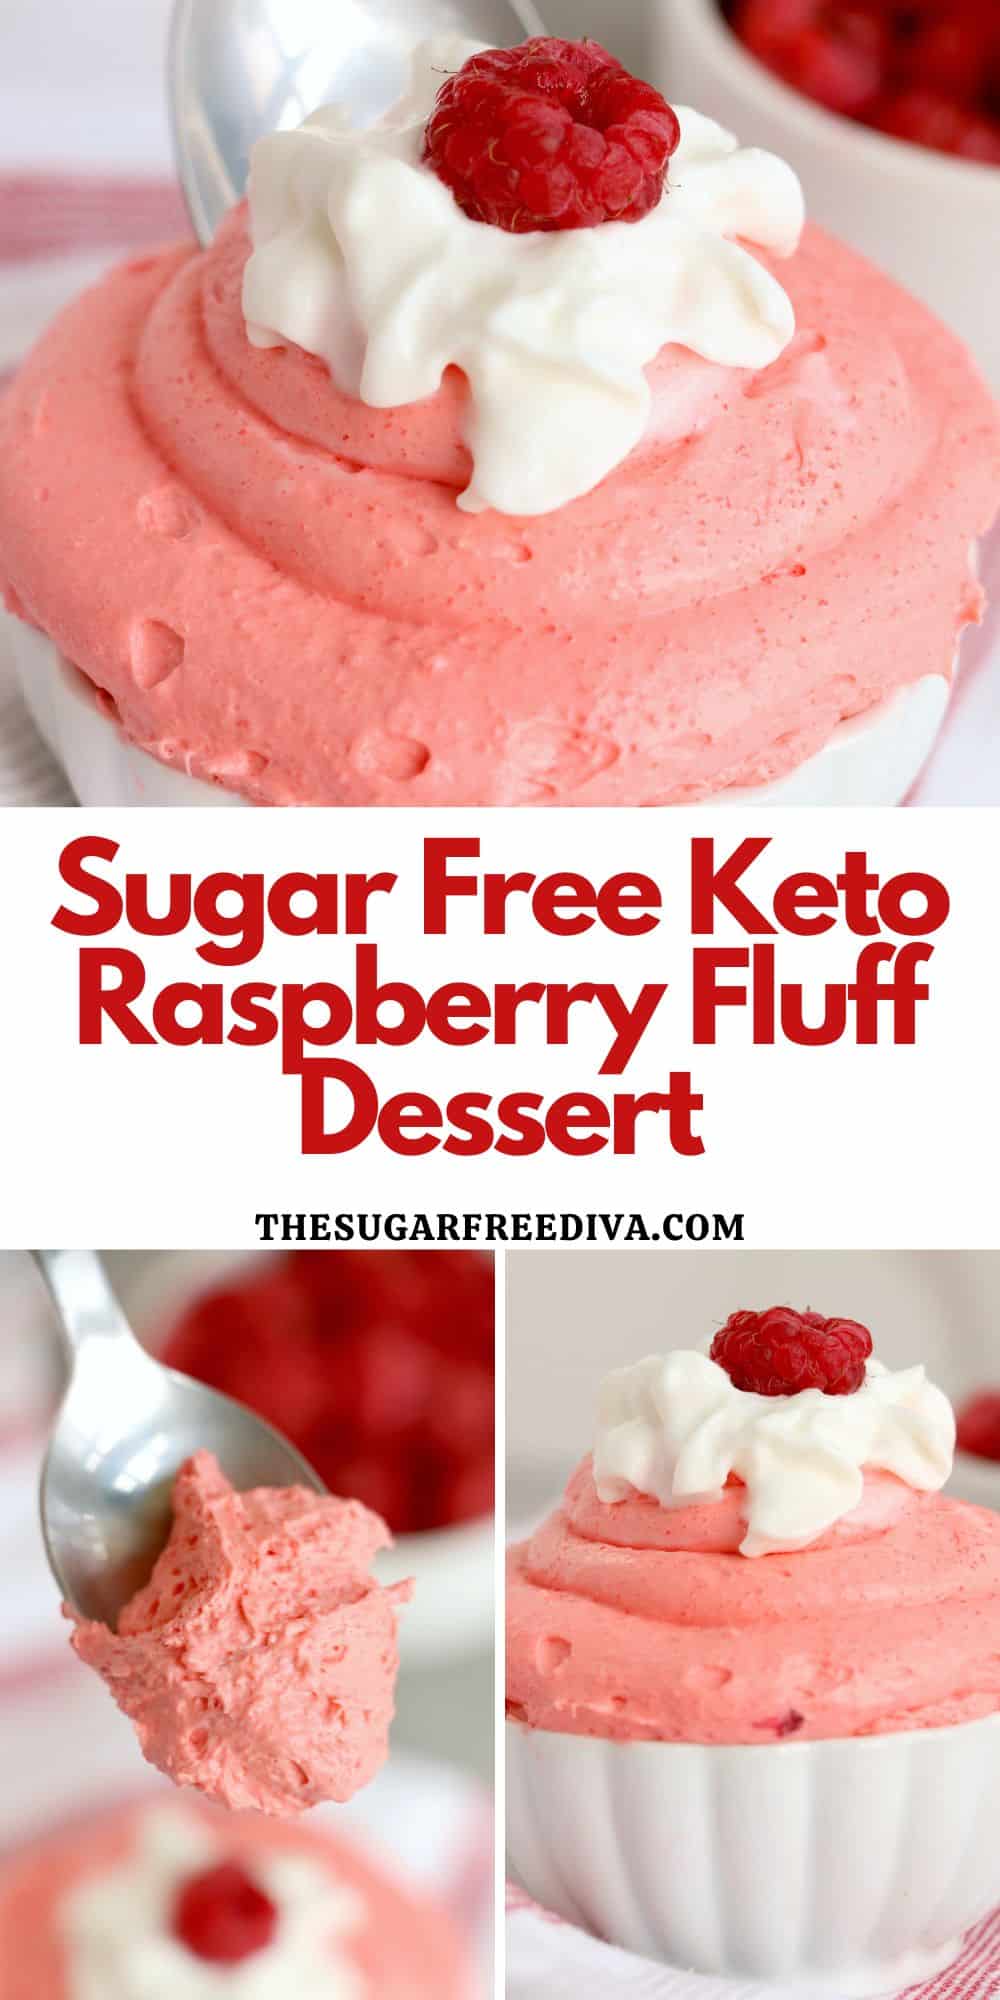 Sugar Free Keto Raspberry Fluff Dessert, a simple and delicious dessert recipe made with fresh raspberries and no added sugar.